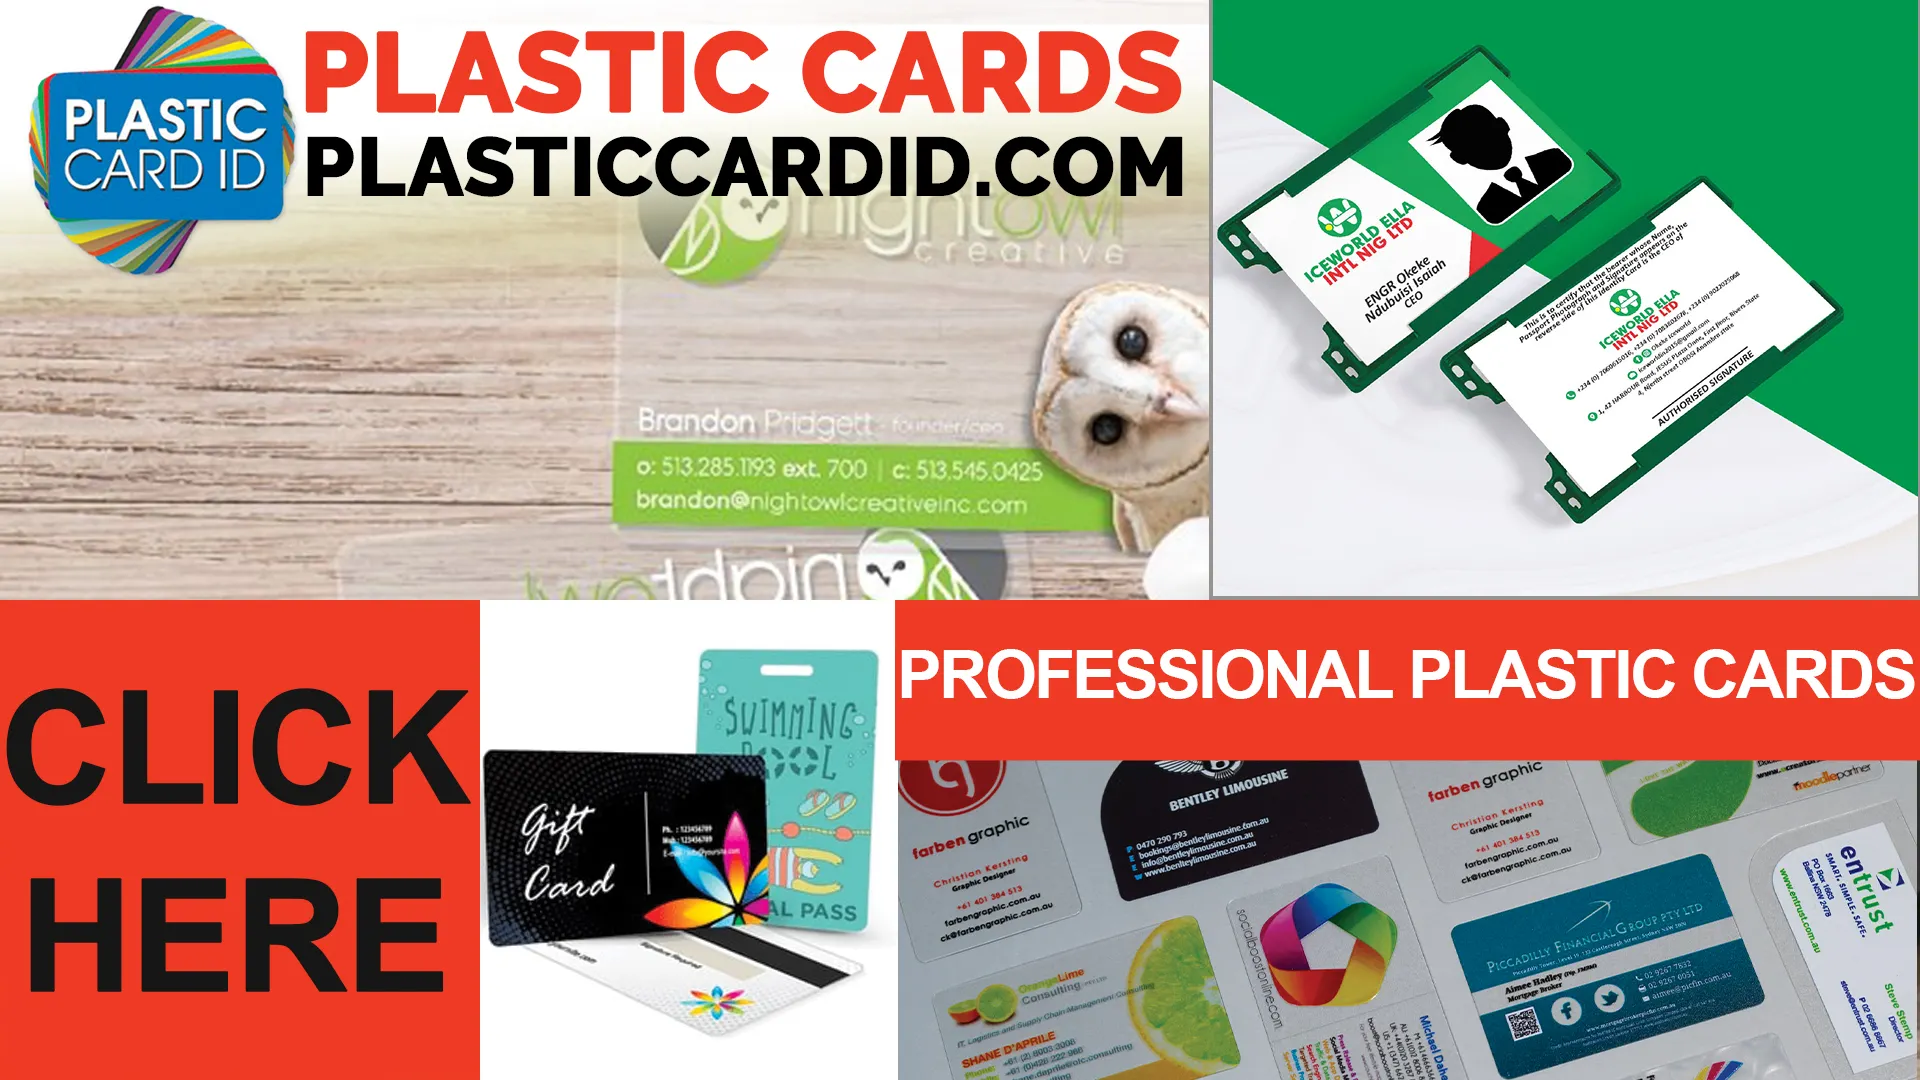 Welcome to Plastic Card ID
: Your Go-To for Lasting Impressions 